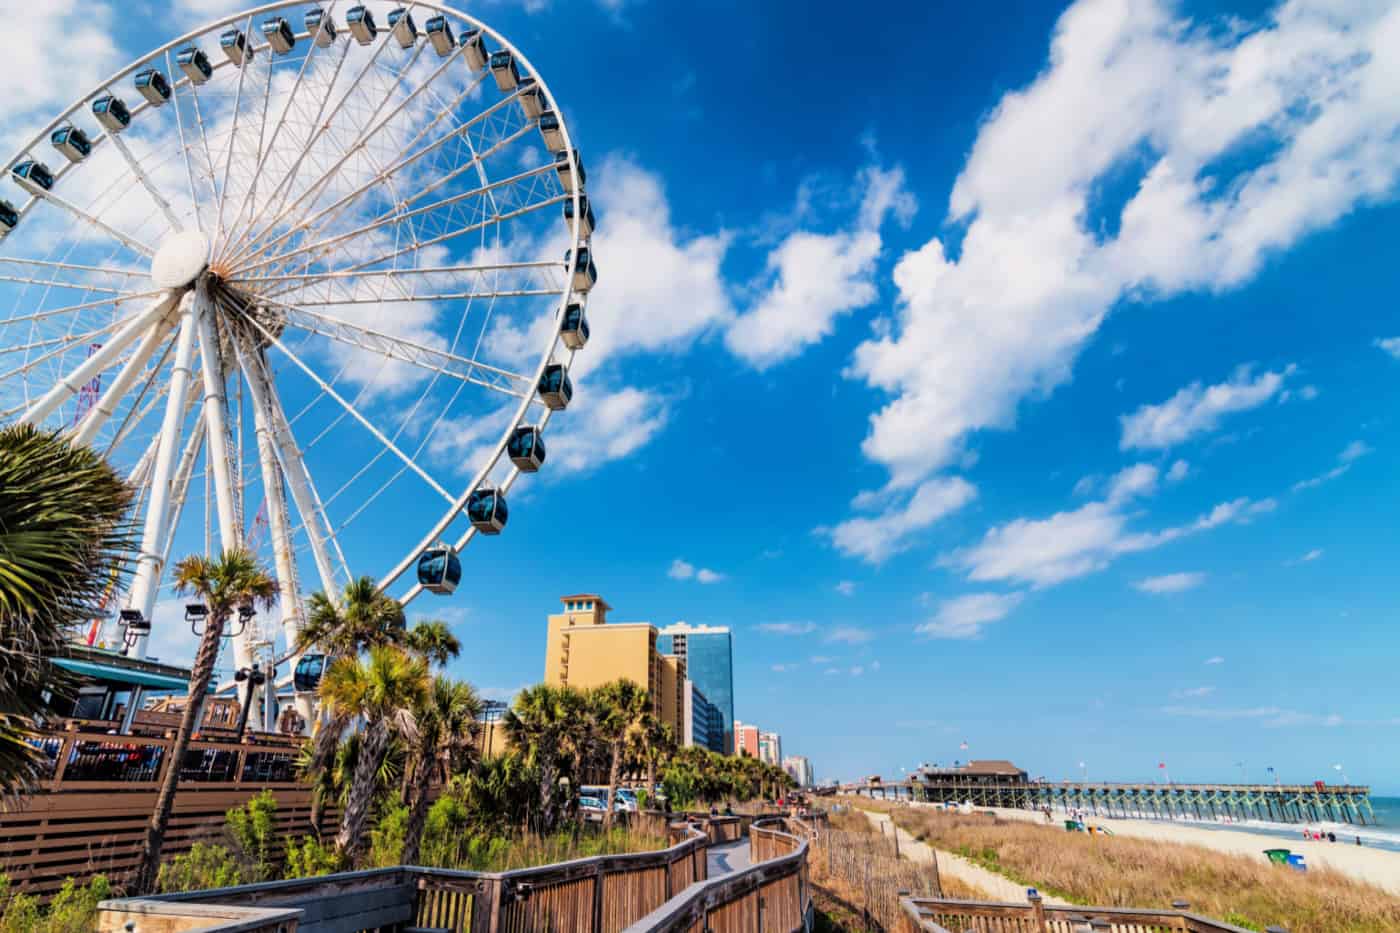 10 Best Things to Do in Myrtle Beach - What Is Myrtle Beach Most